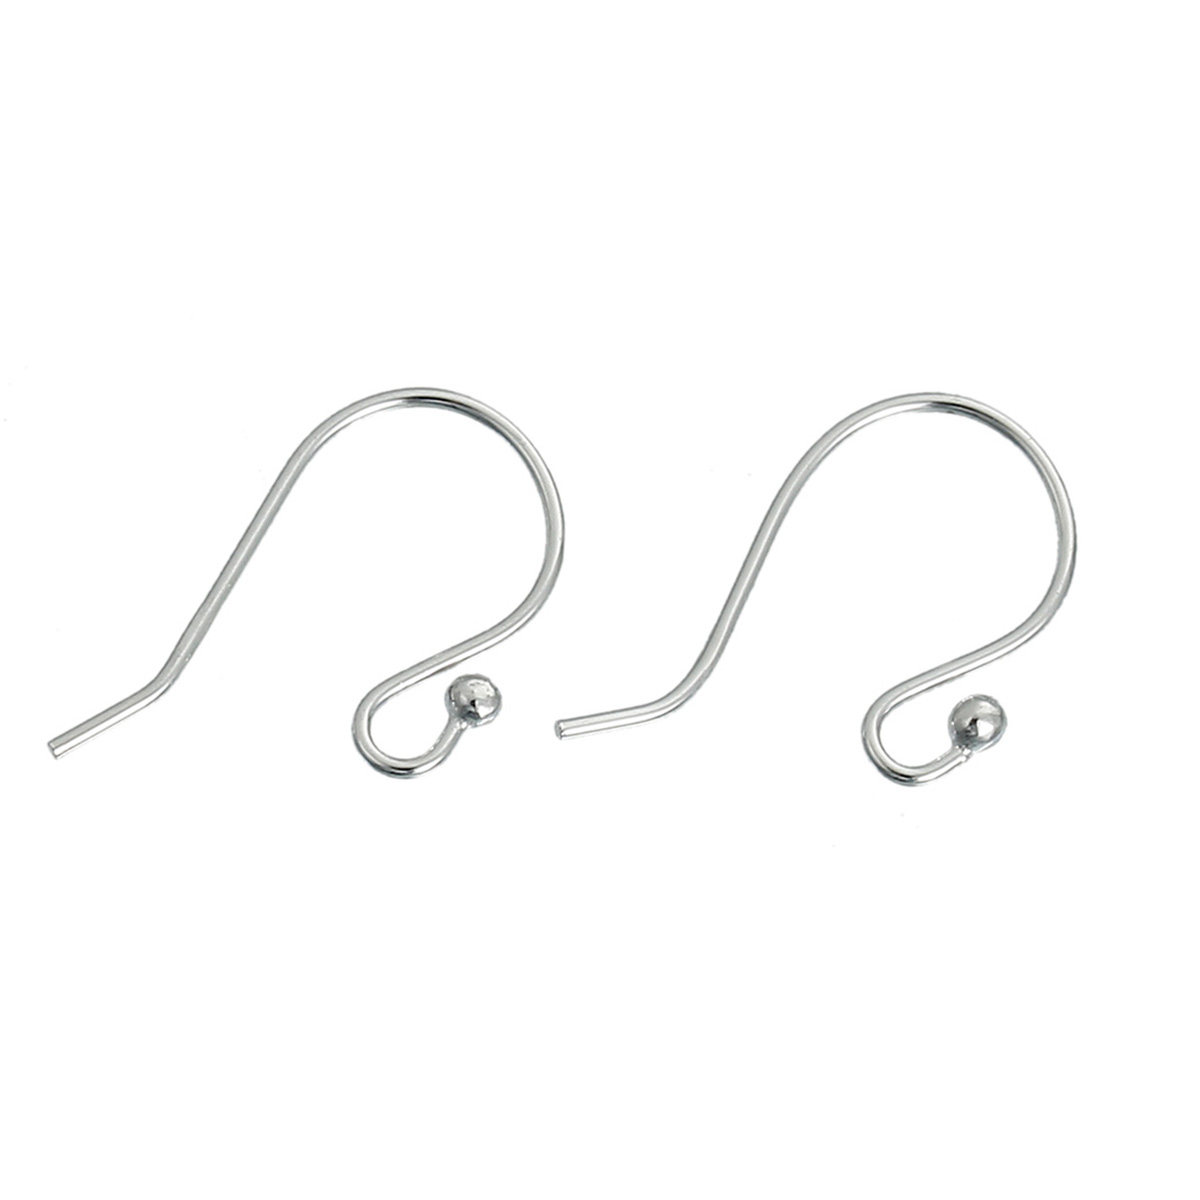 Picture of 0.6mm Sterling Silver Ear Wire Hooks Earring Findings Platinum Plated 14mm x8mm( 4/8" x 3/8") - 13mm x8mm( 4/8" x 3/8"), Post/ Wire Size: (22 gauge), 1 Pair